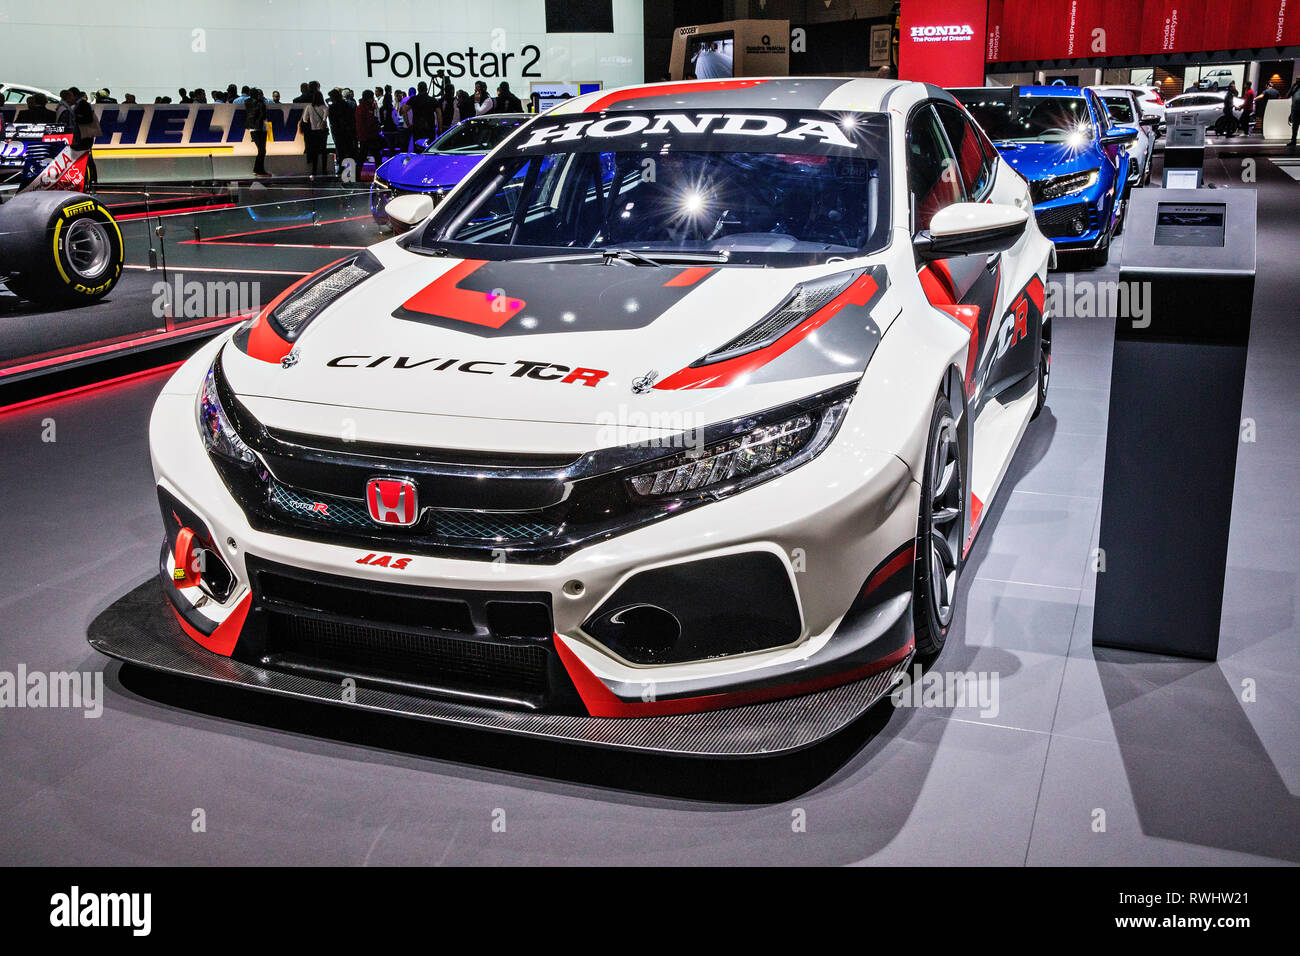 Honda Civic Tcr Was Presented During The 19 Geneva International Motor Show On Tuesday March 5th 19 Ctk Photo Josef Horazny Stock Photo Alamy